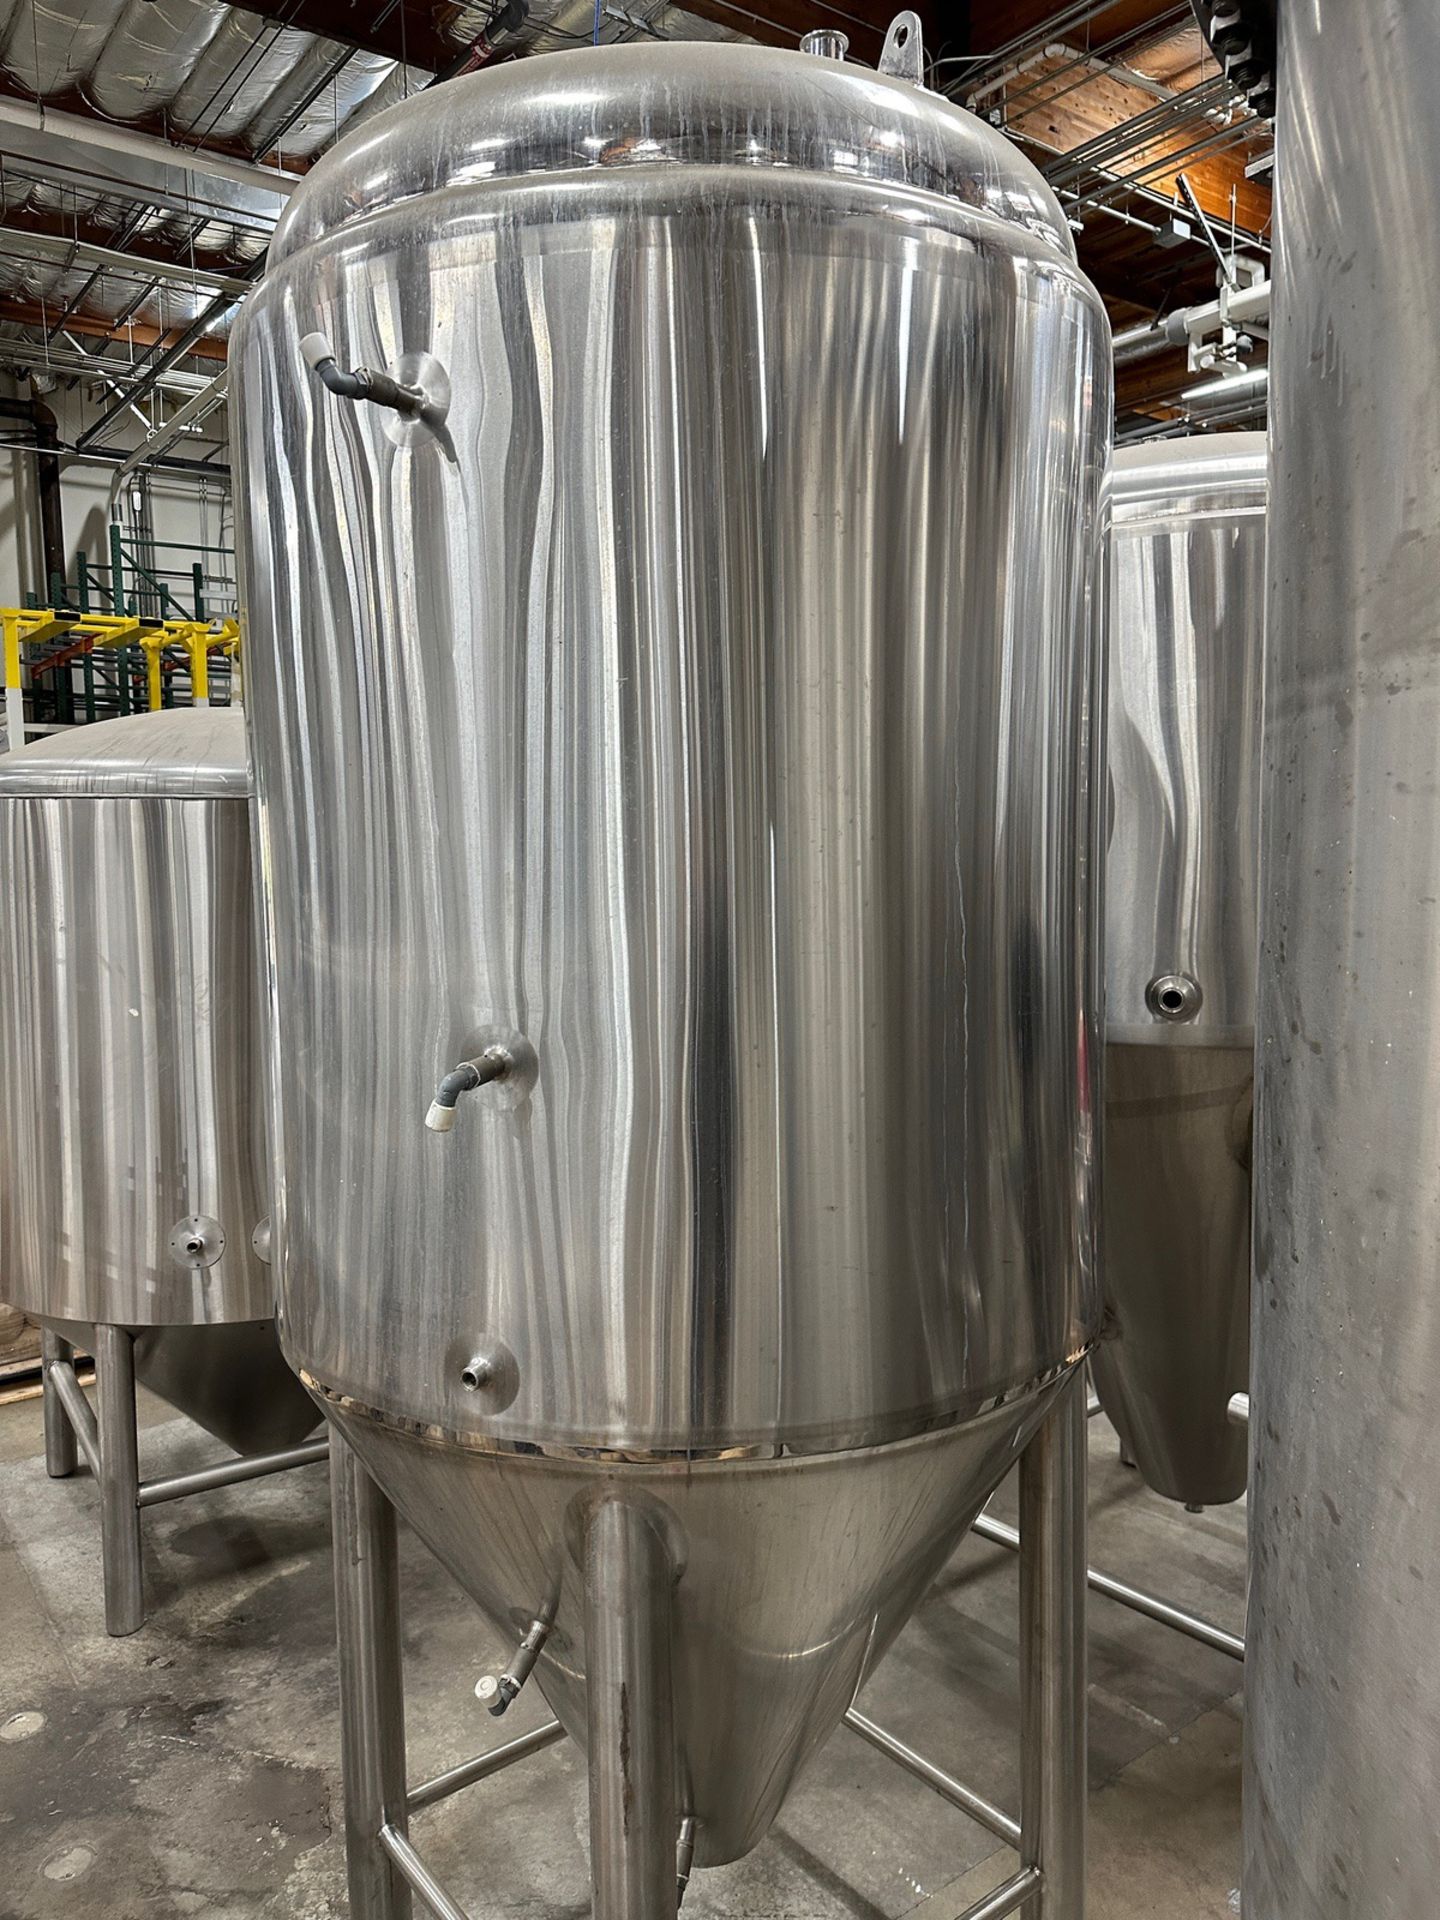 15 BBL Stainless Steel Fermentation Tank, Cone Bottom, Glycol Jacketed, No Fittings | Rig Fee $750 - Image 2 of 2